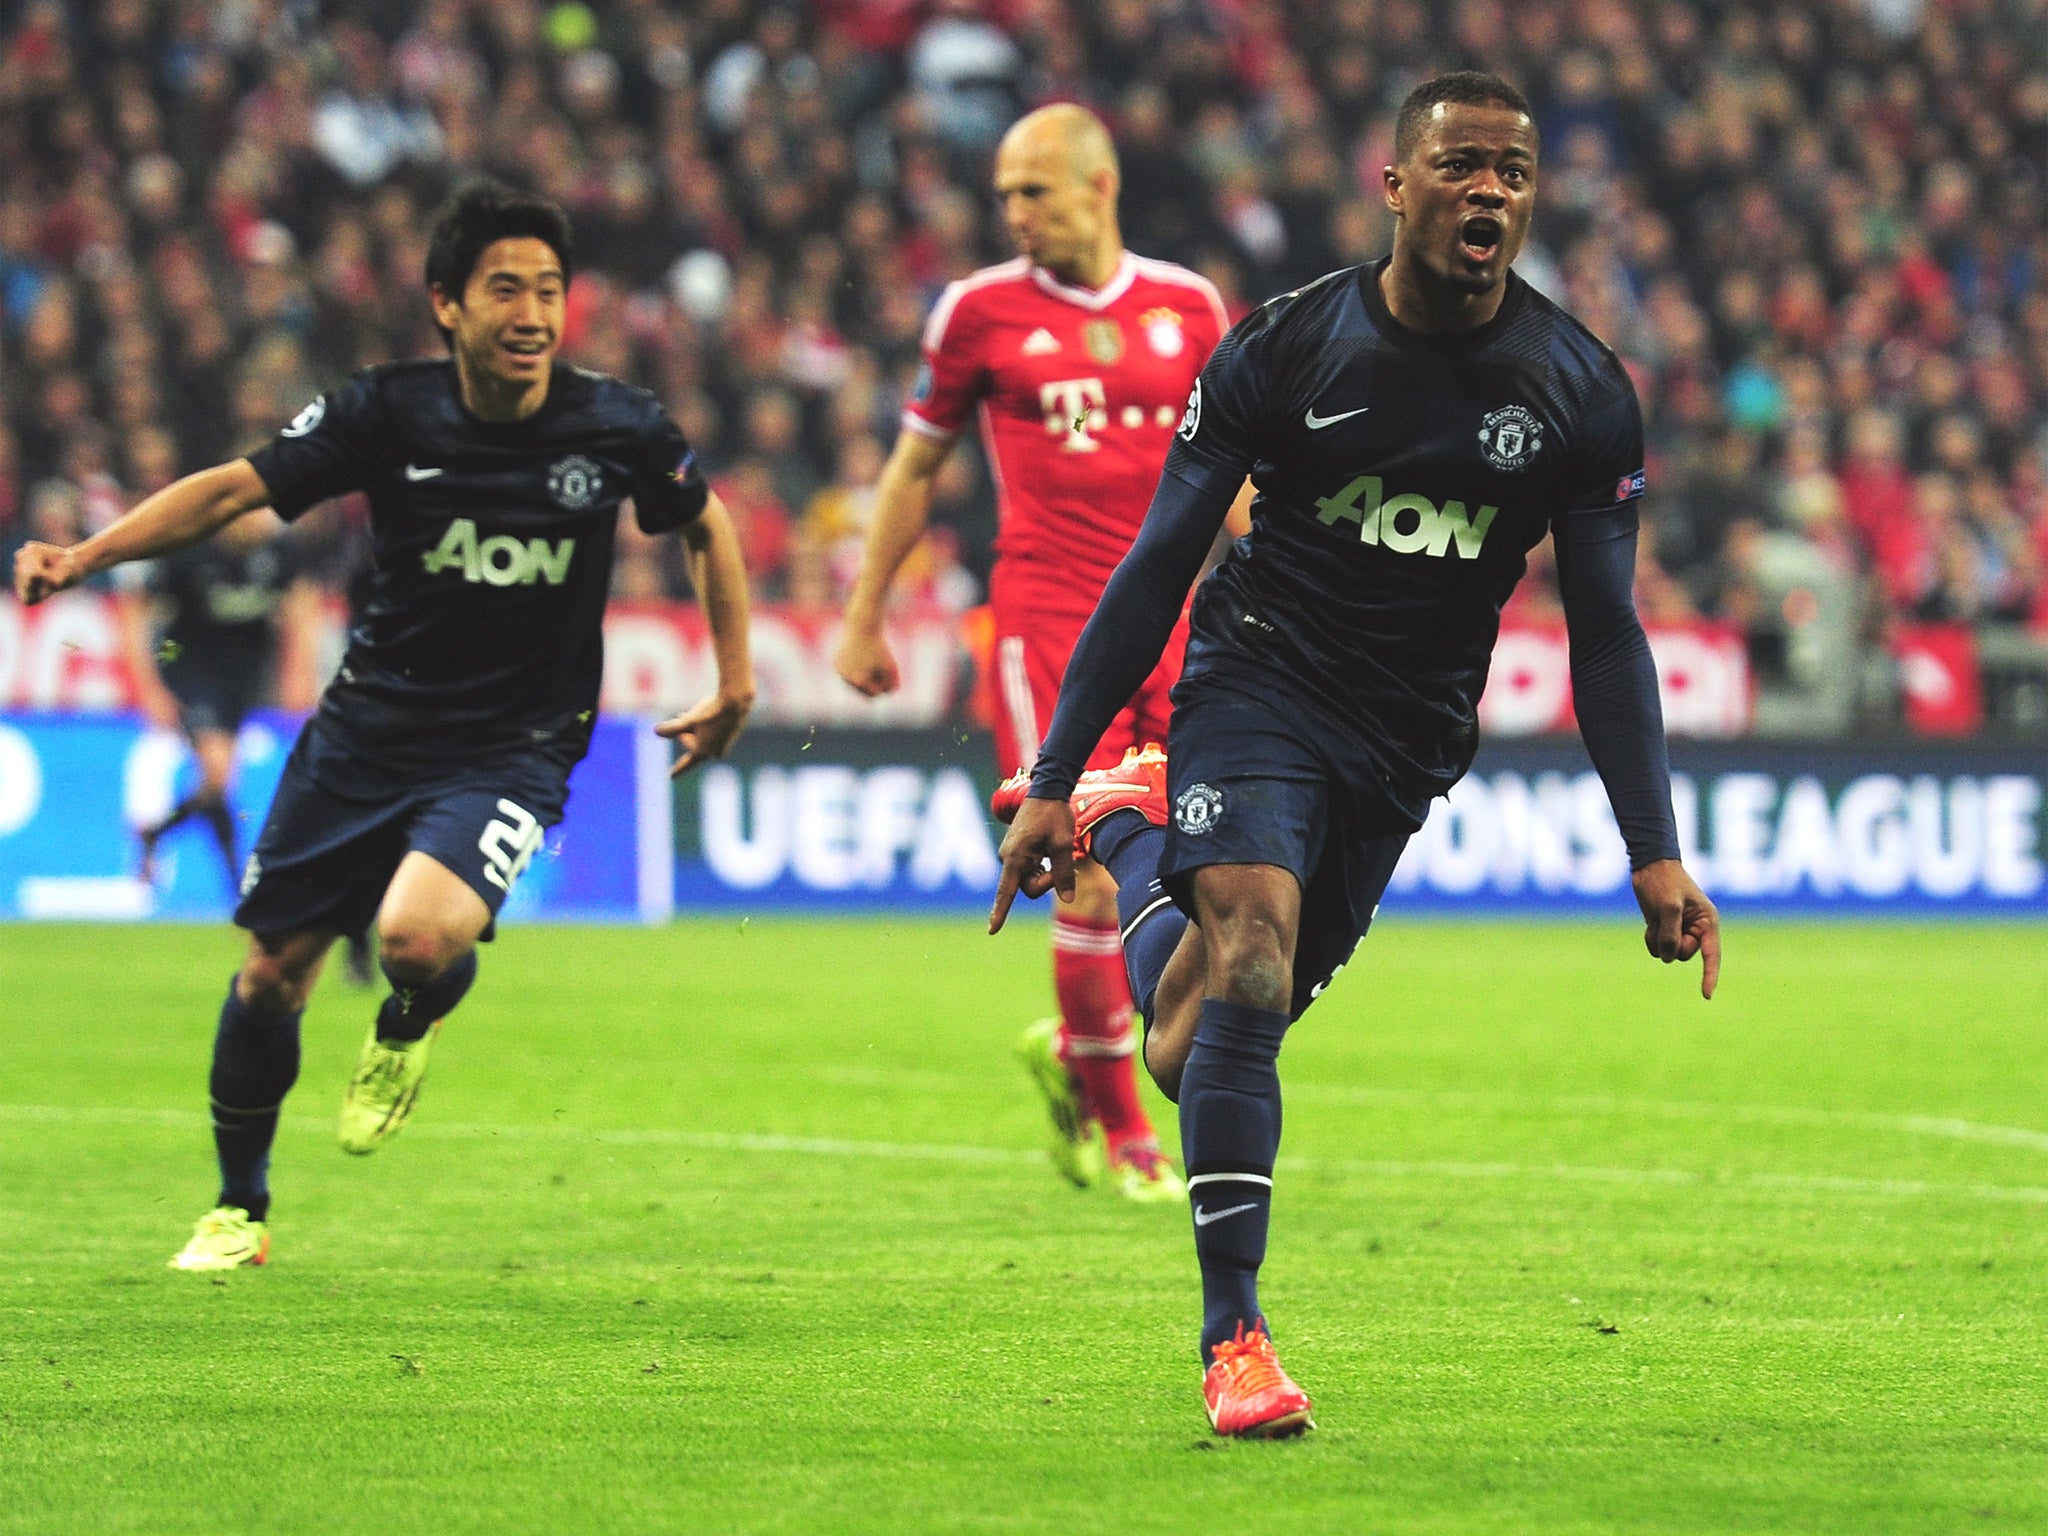 Patrice Evra will stay on at Manchester United